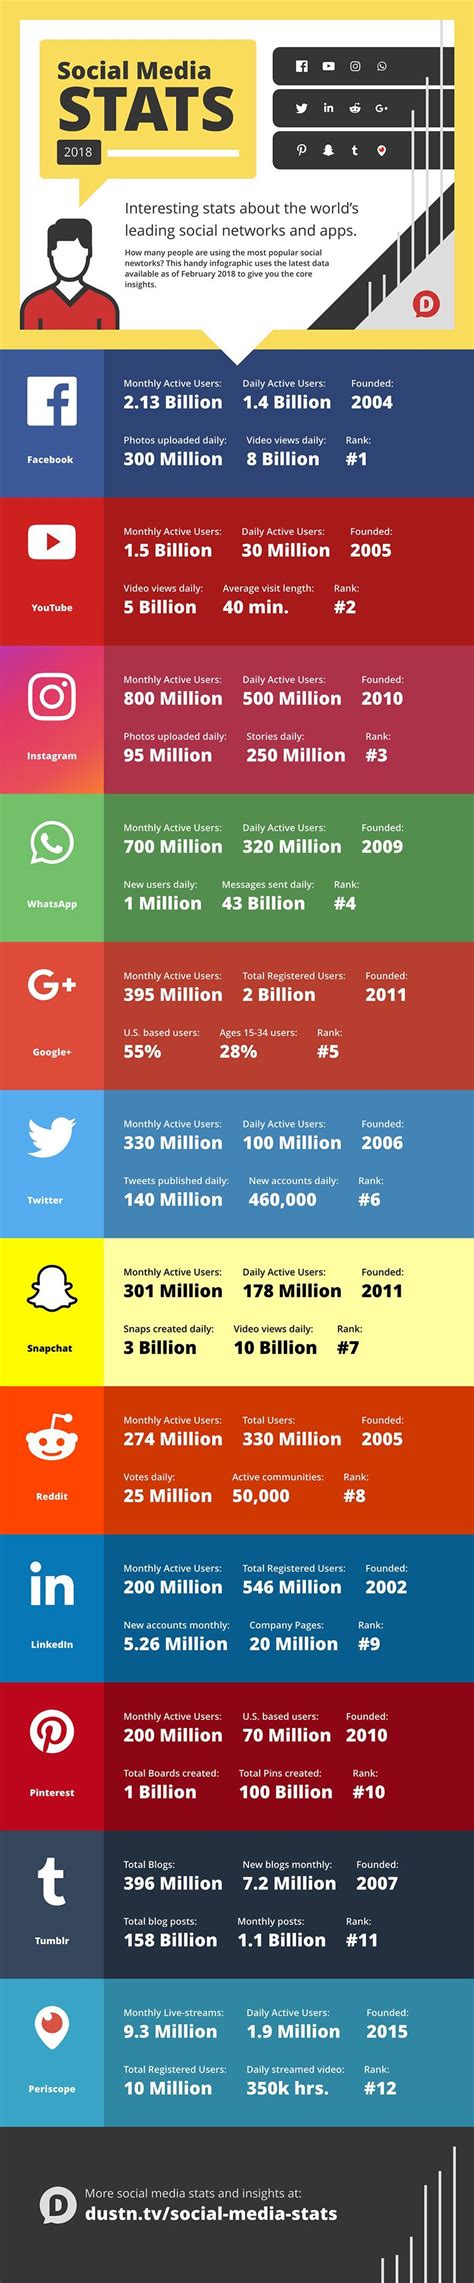 60 Social Media Stats To Guide Your 2018 Strategy [infographic] Social Media Apps Social Media